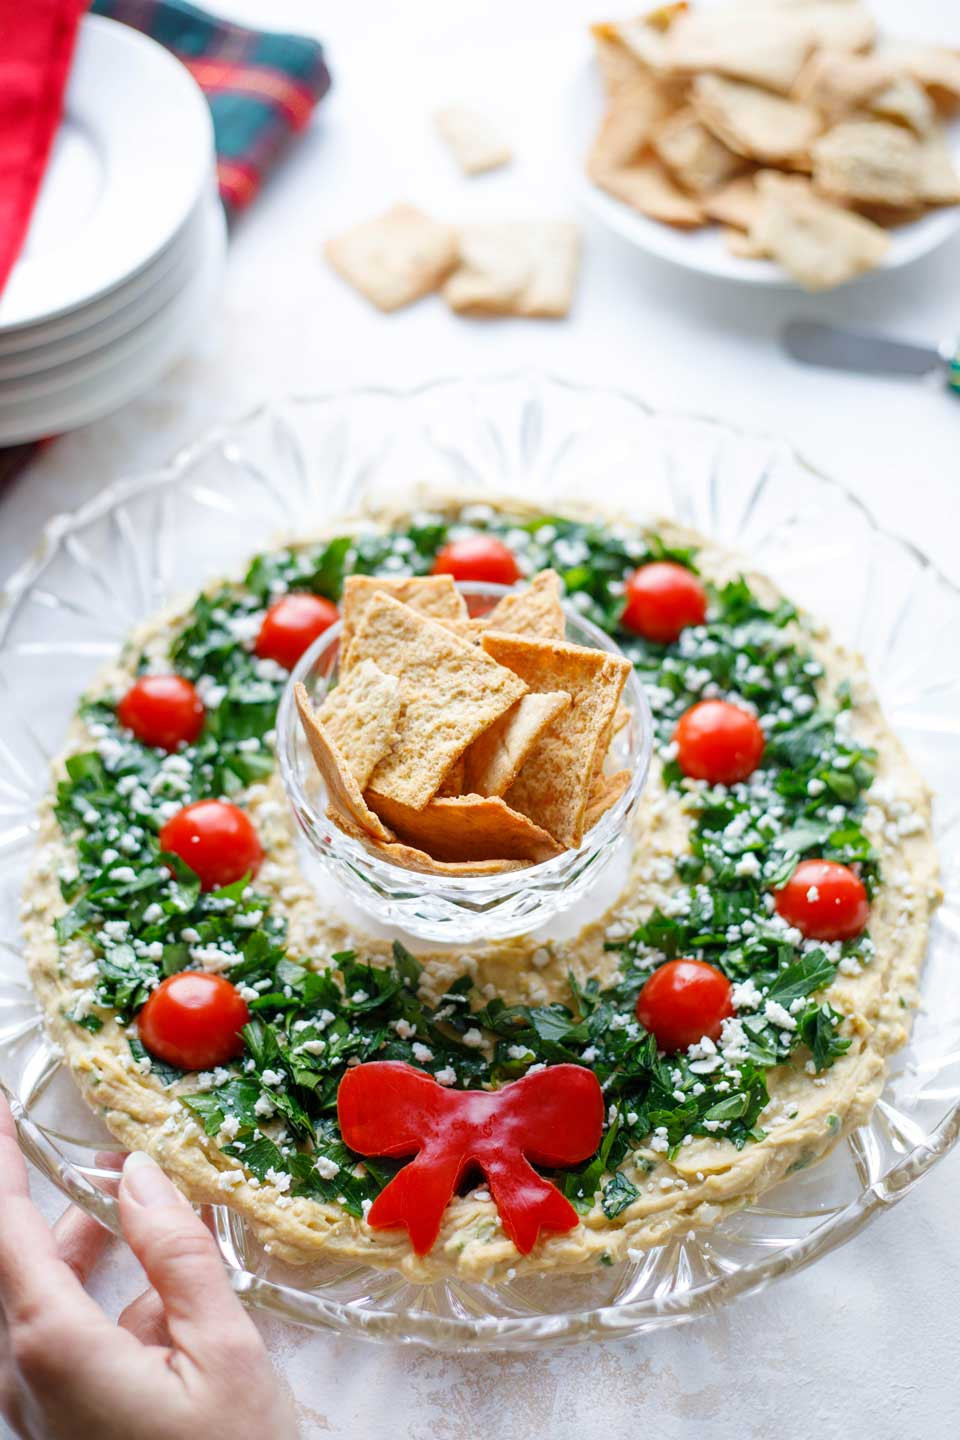 Appetizers For Christmas Party
 Easy Christmas Appetizer "Hummus Wreath" Two Healthy